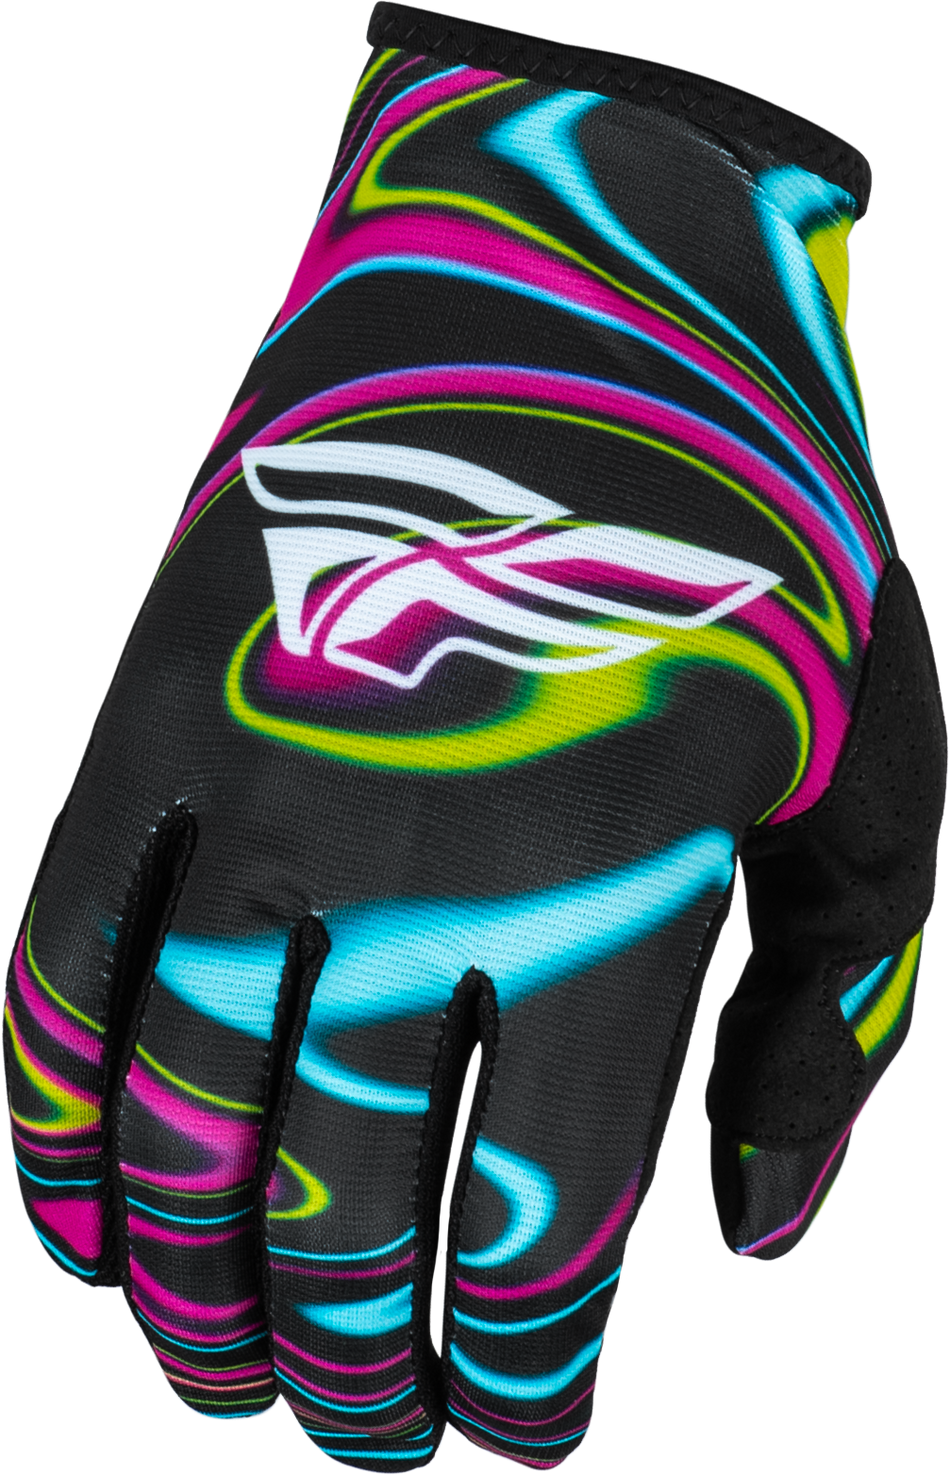 FLY RACING Lite Warped Gloves Black/Pink/Electric Blue Xs 377-743XS